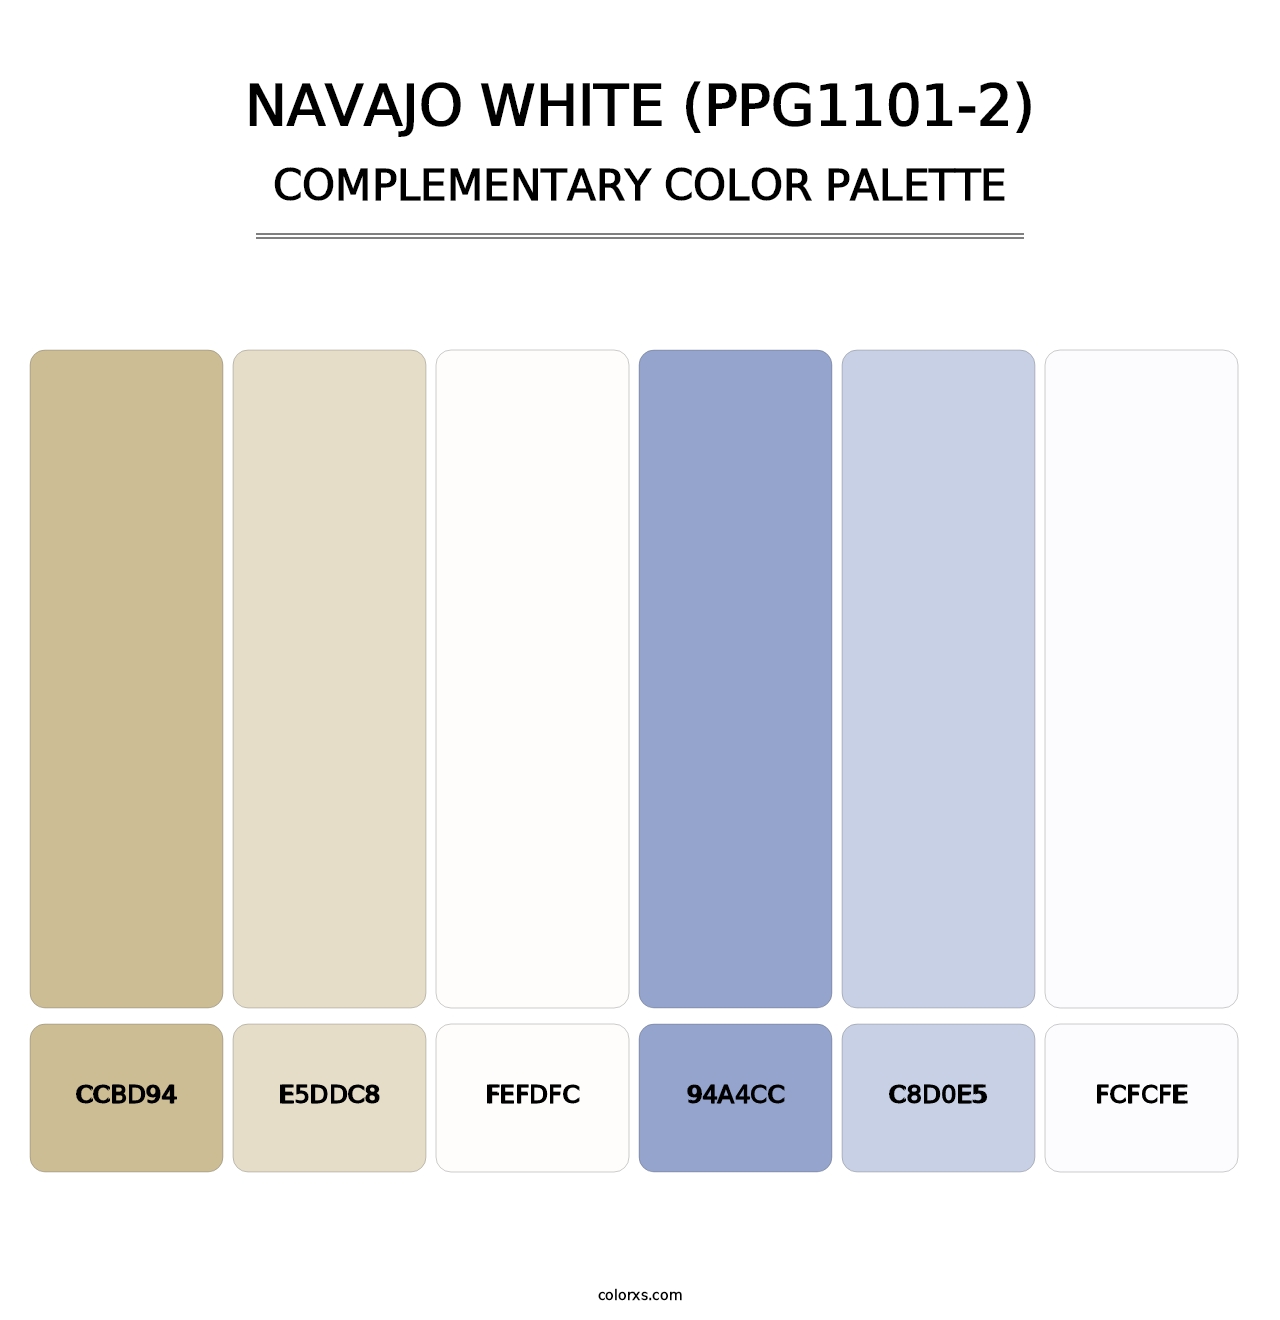 Navajo White (PPG1101-2) - Complementary Color Palette